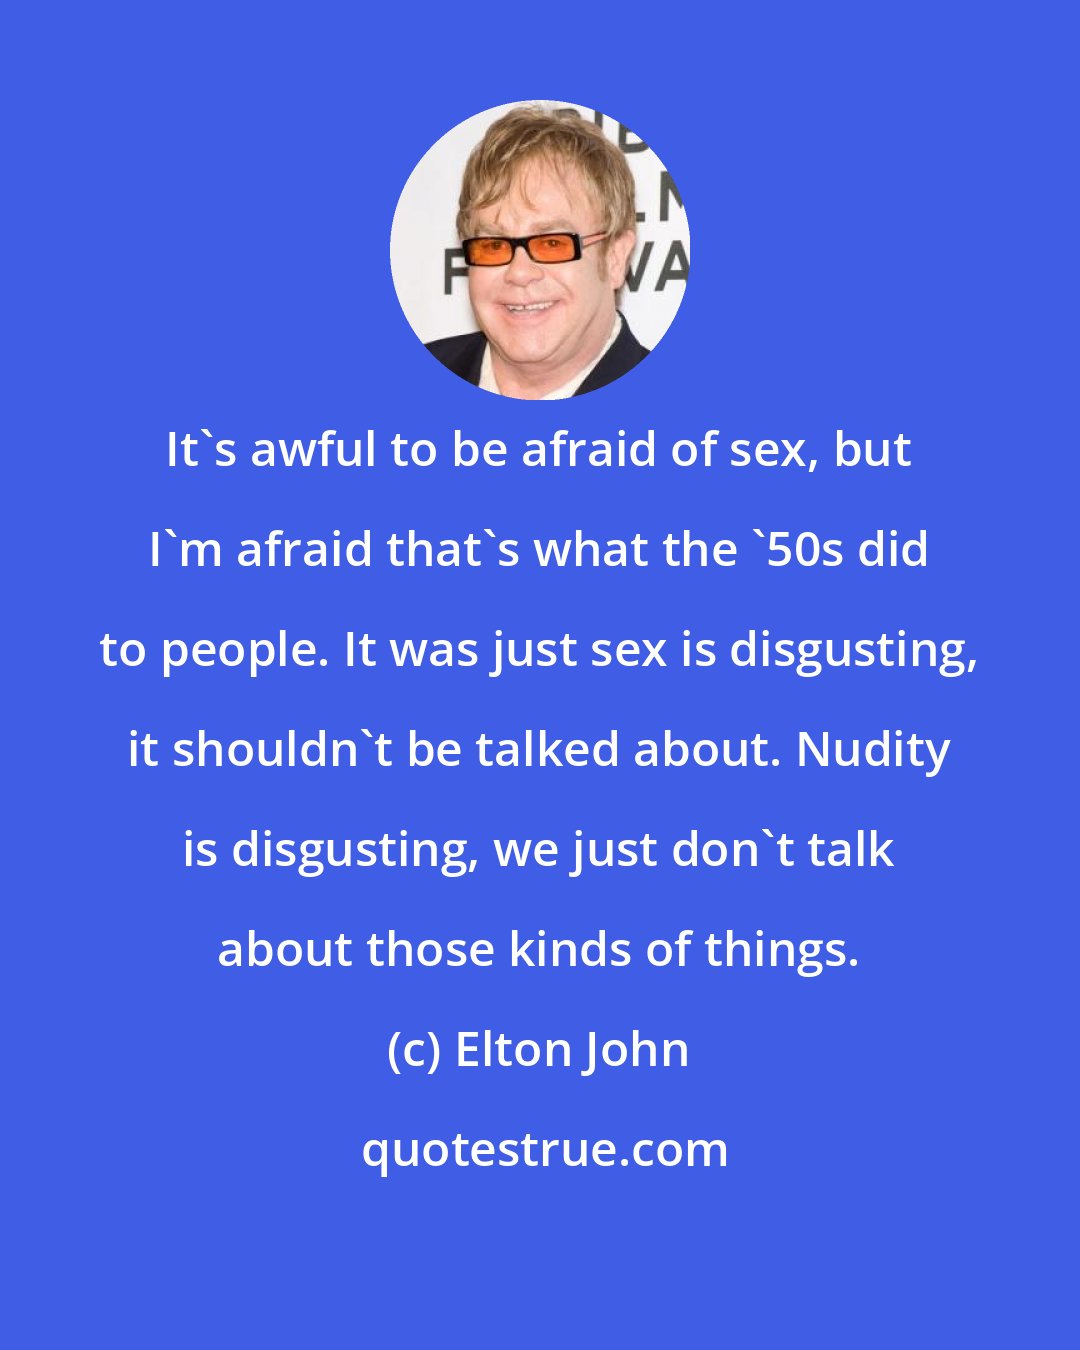 Elton John: It's awful to be afraid of sex, but I'm afraid that's what the '50s did to people. It was just sex is disgusting, it shouldn't be talked about. Nudity is disgusting, we just don't talk about those kinds of things.